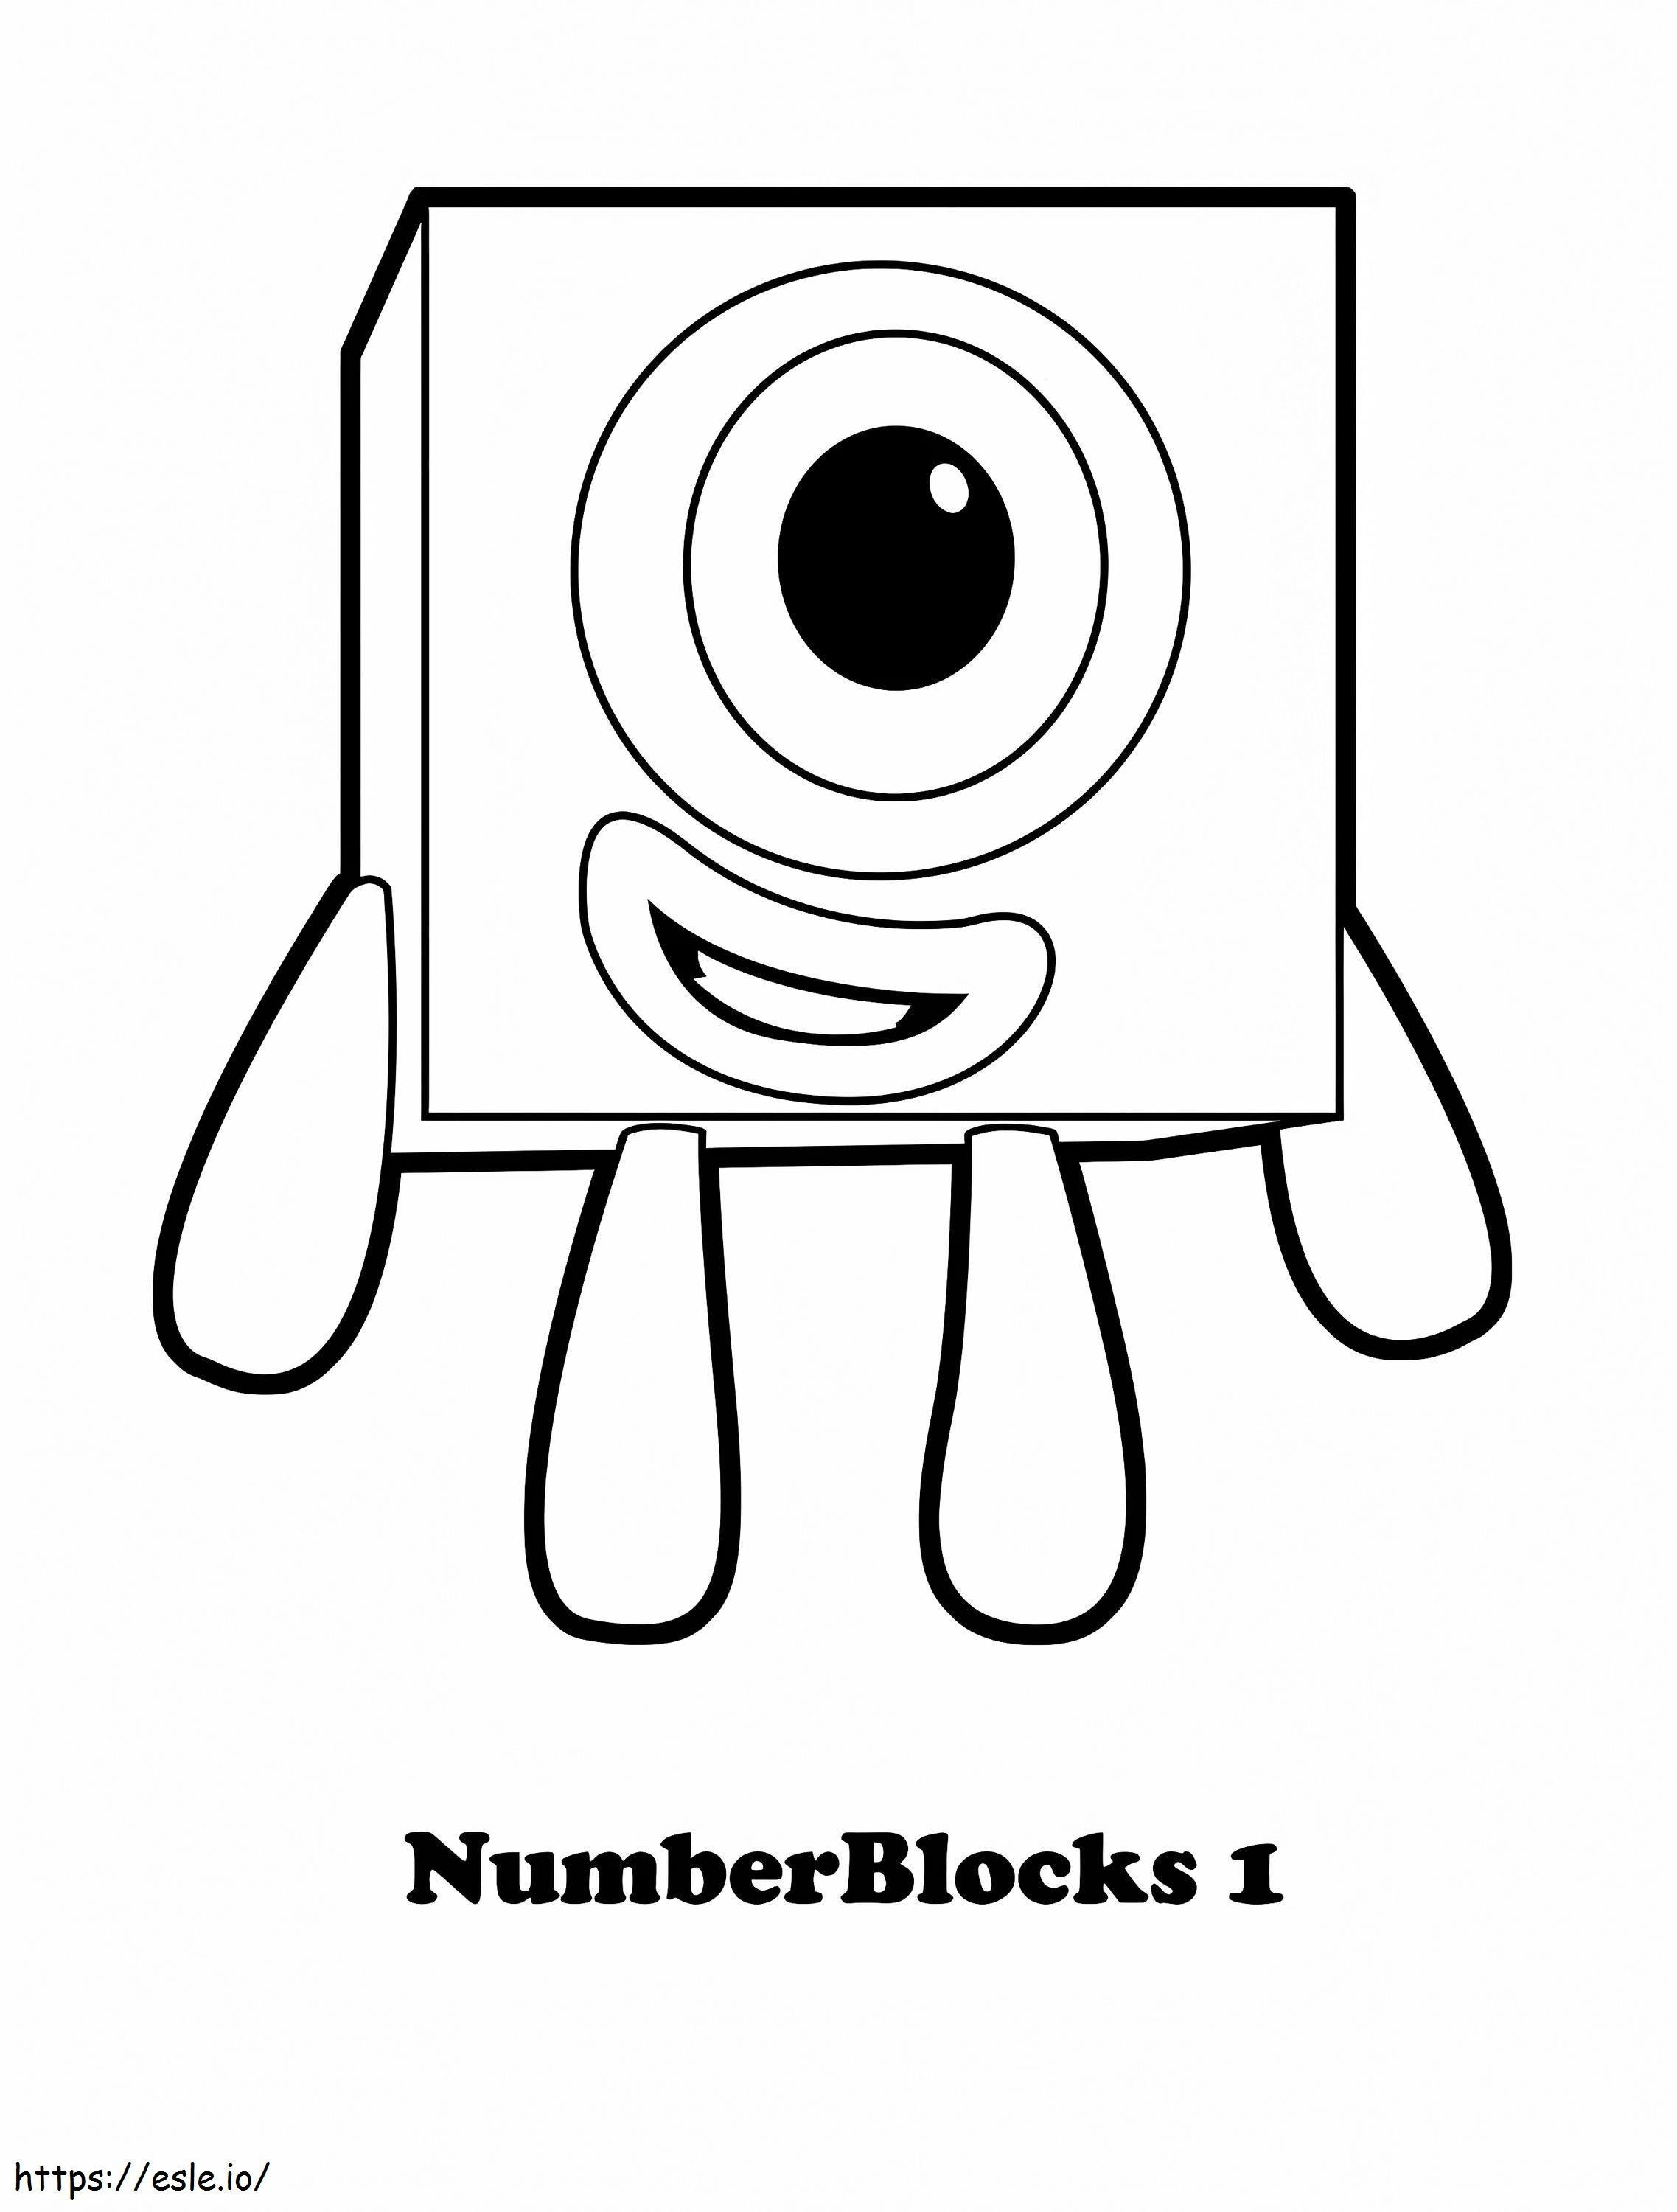 1581563586 Fun House Toys Numberblocks Coloring For Kids Número Bombeiro Livro Fire Engine Pictures Para Colorir Uma Folha Bombeiro Coloring Scaled 1 para colorir